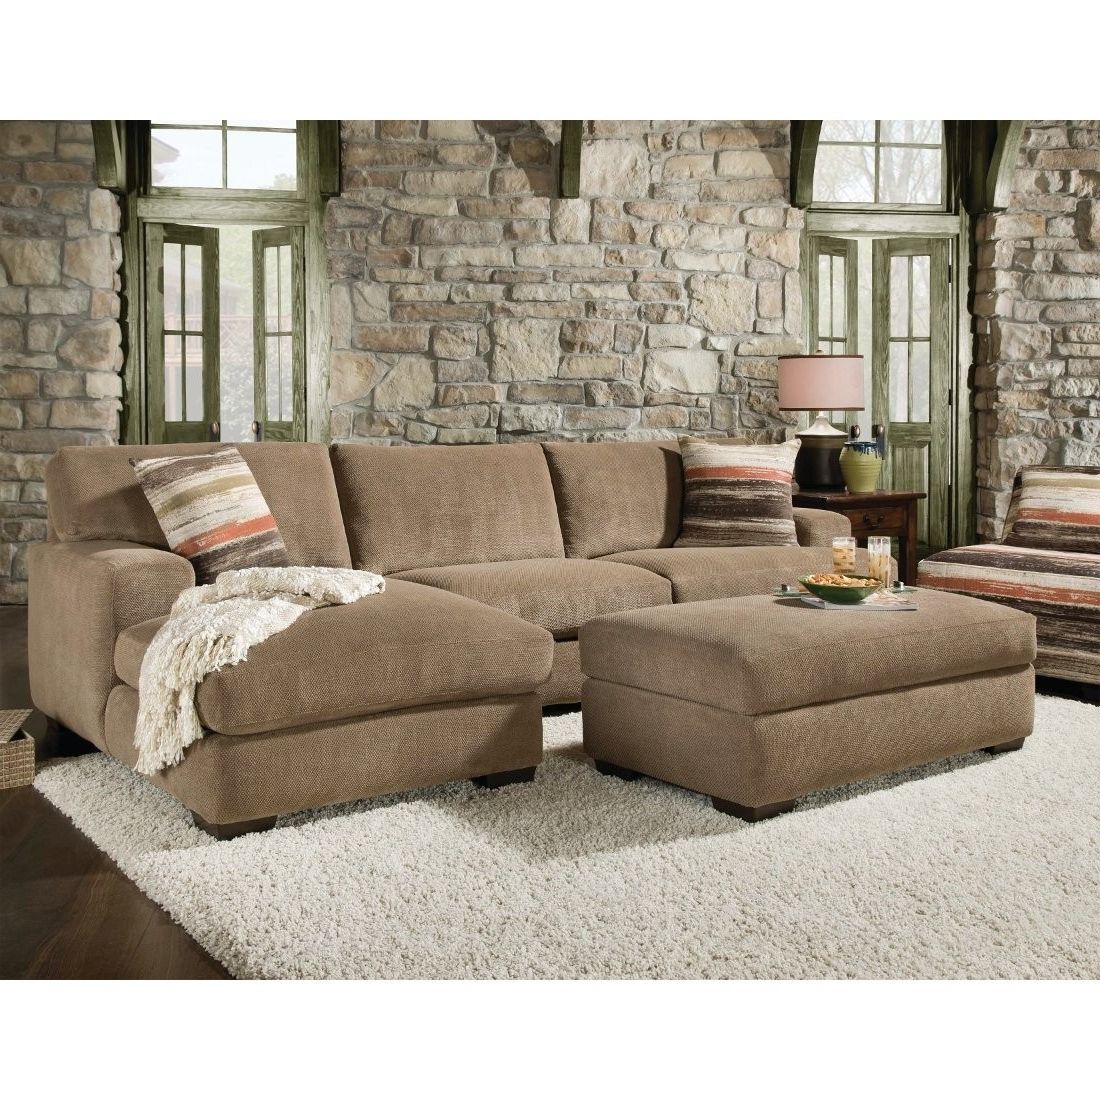 Chaise Sectional Sofas Intended For 2017 Beautiful Sectional Sofa With Chaise And Ottoman Pictures (View 6 of 15)